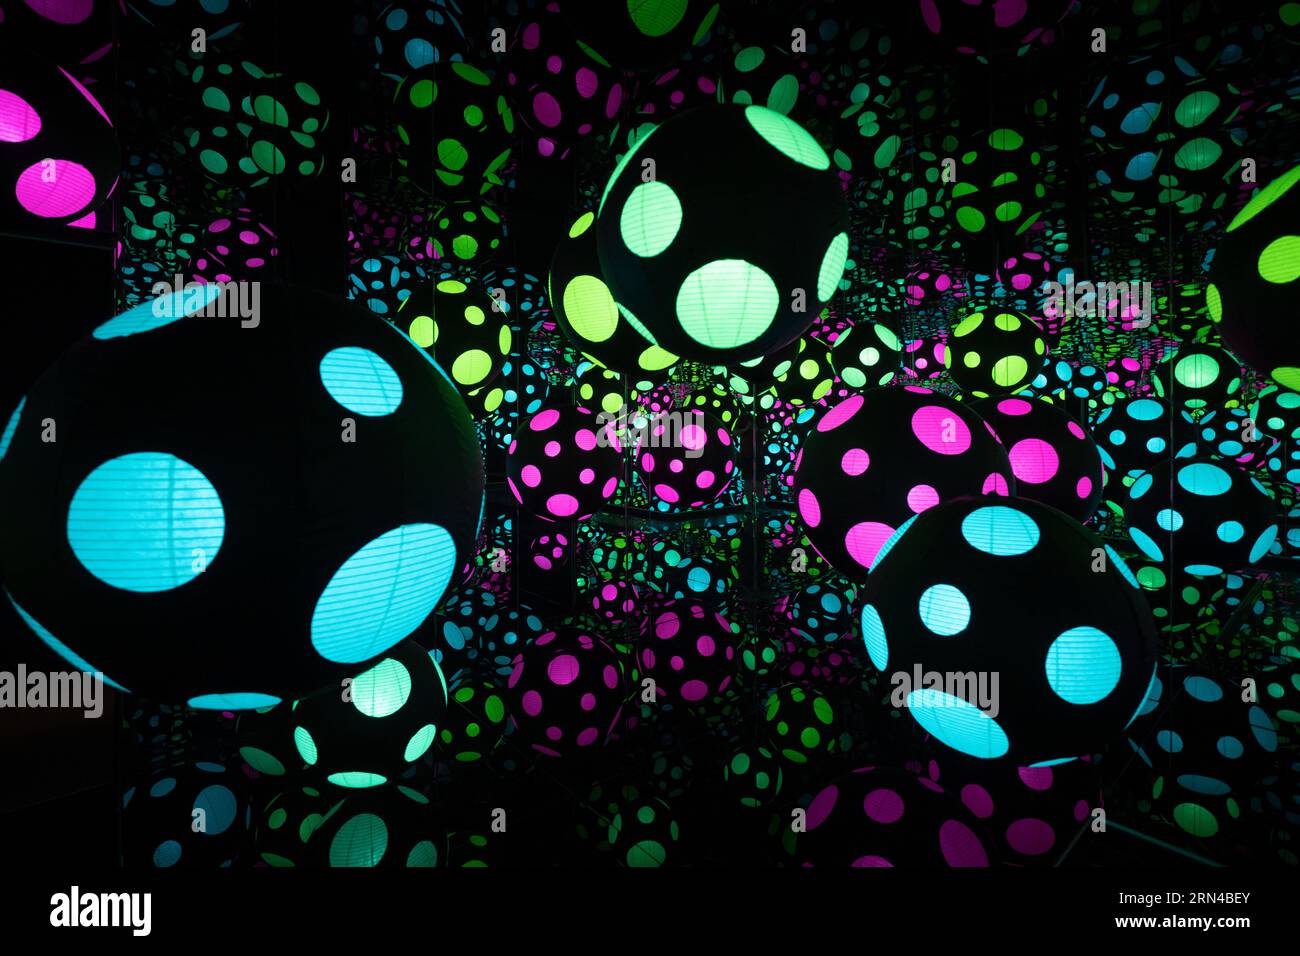 WASHINGTON DC, United States — One of the innovative Infinity Rooms that forms part of the 'One with Eternity' exhibit by Yayoi Kusama at the Smithsonian Hirshhorn Museum. This work by the famed Japanese contemporary artist epitomizes her signature style of melding polka dots, mirrors, and infinite space, highlighting the interconnectedness of life and the cosmos. Stock Photo